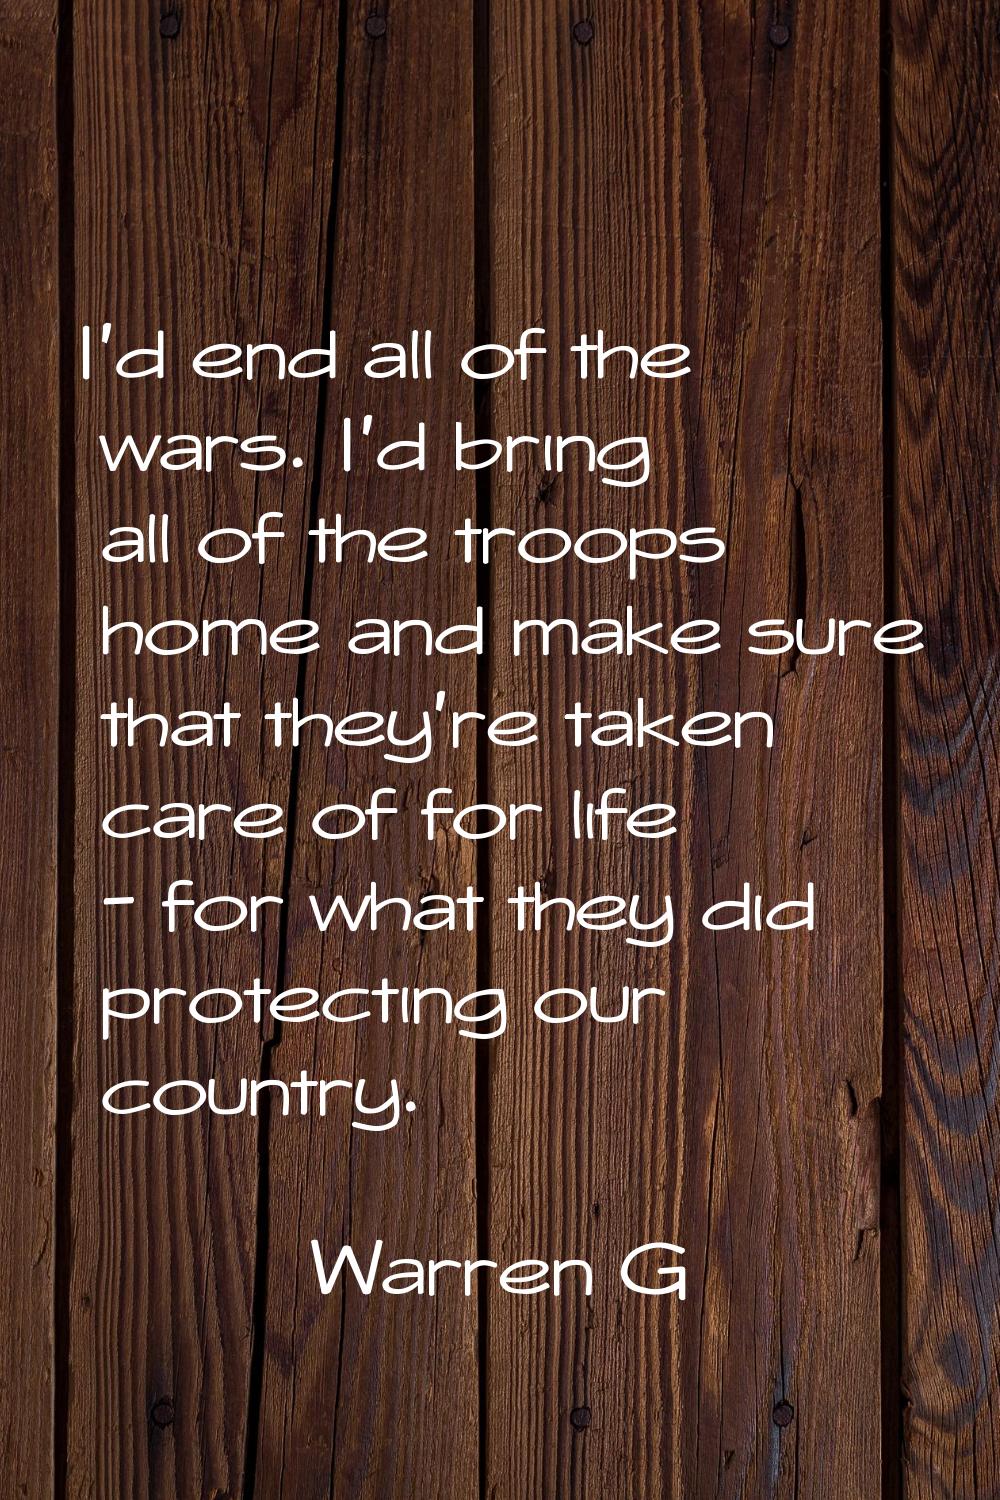 I'd end all of the wars. I'd bring all of the troops home and make sure that they're taken care of 